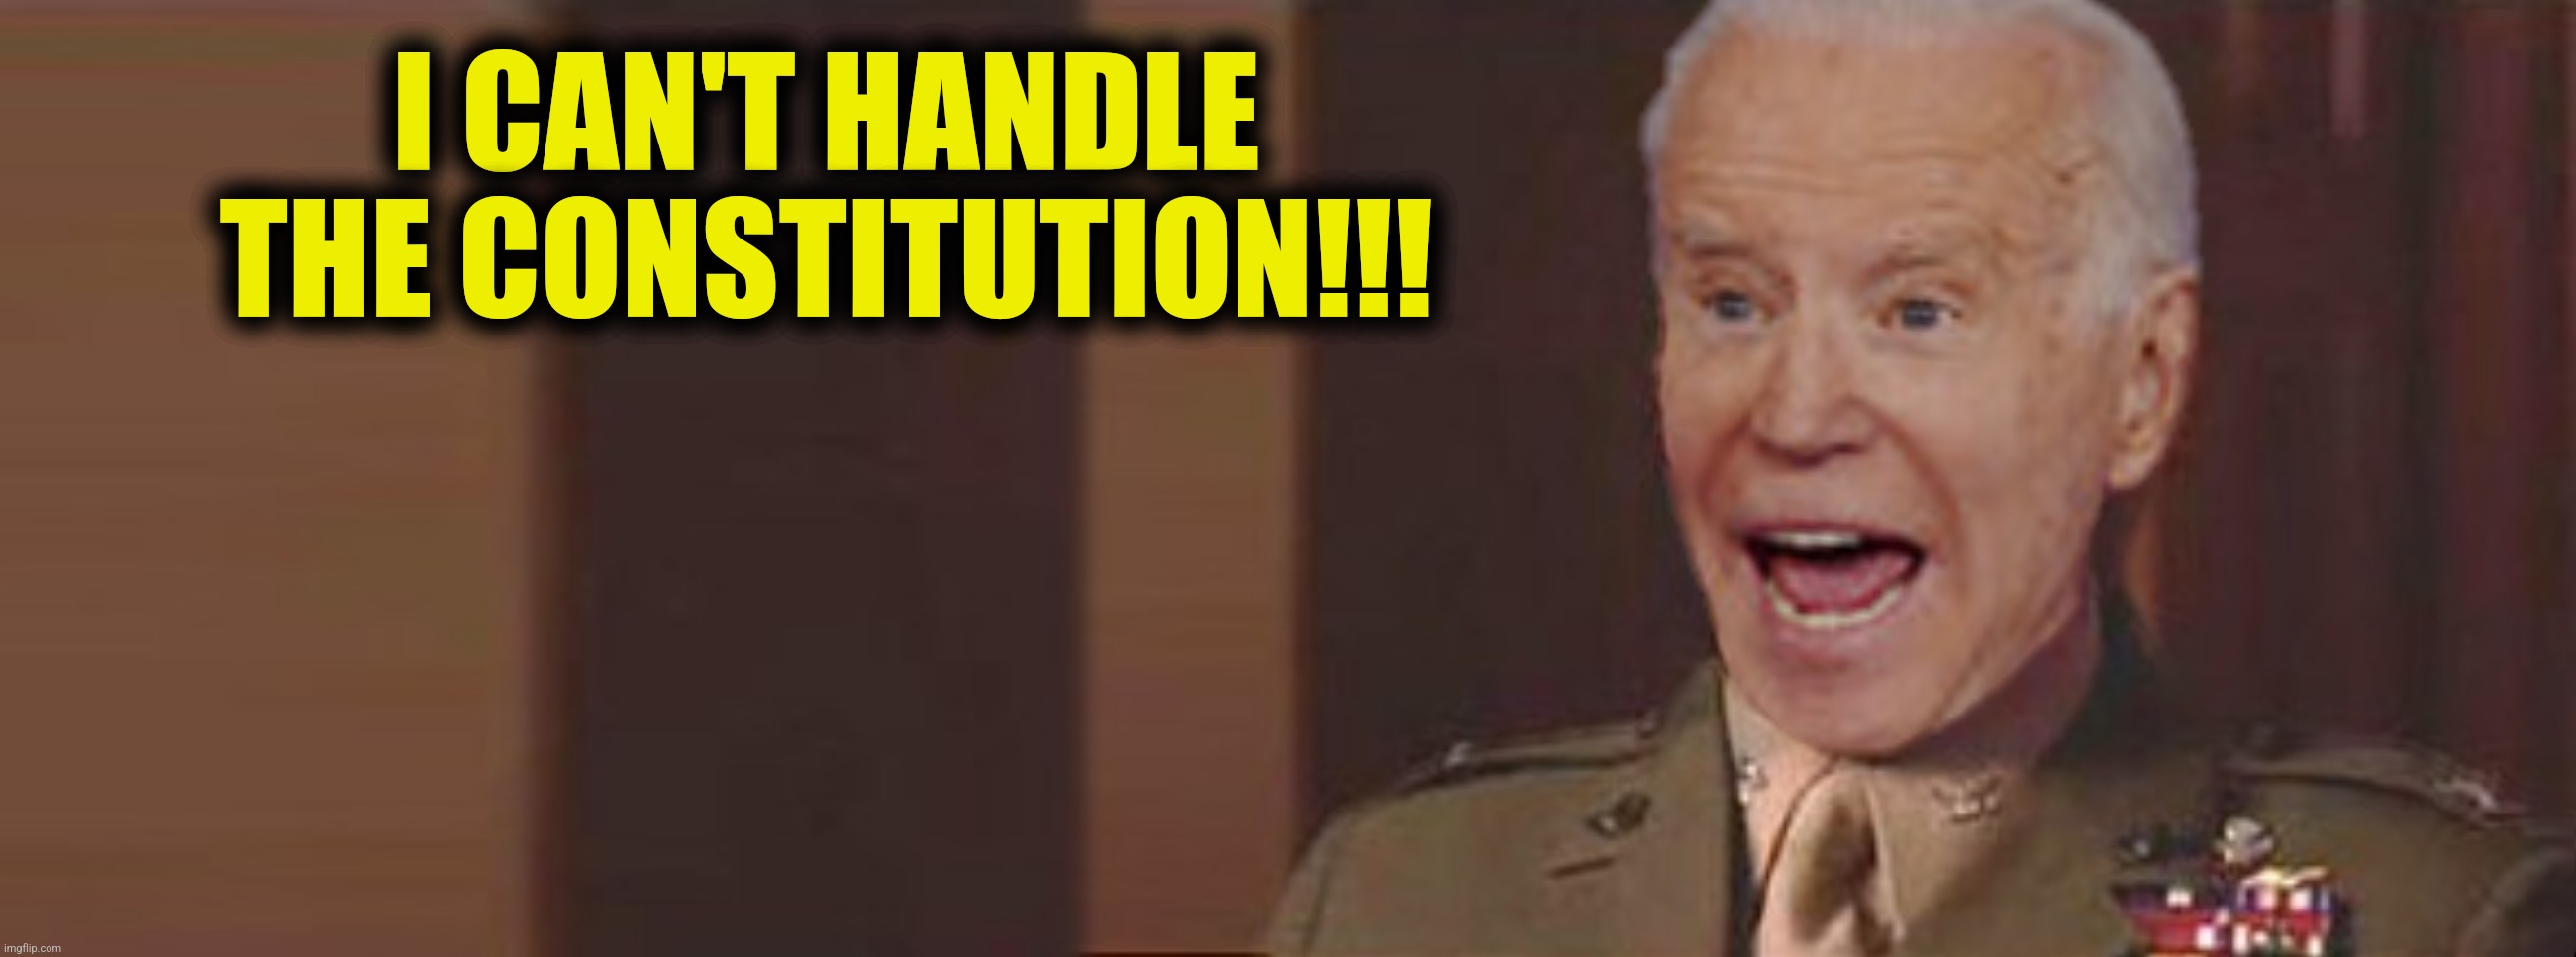 Bad Photoshop Sunday presents:  When you can't find A Few Good Men | I CAN'T HANDLE THE CONSTITUTION!!! | image tagged in bad photoshop sunday,joe biden,the constitution,a few good men | made w/ Imgflip meme maker